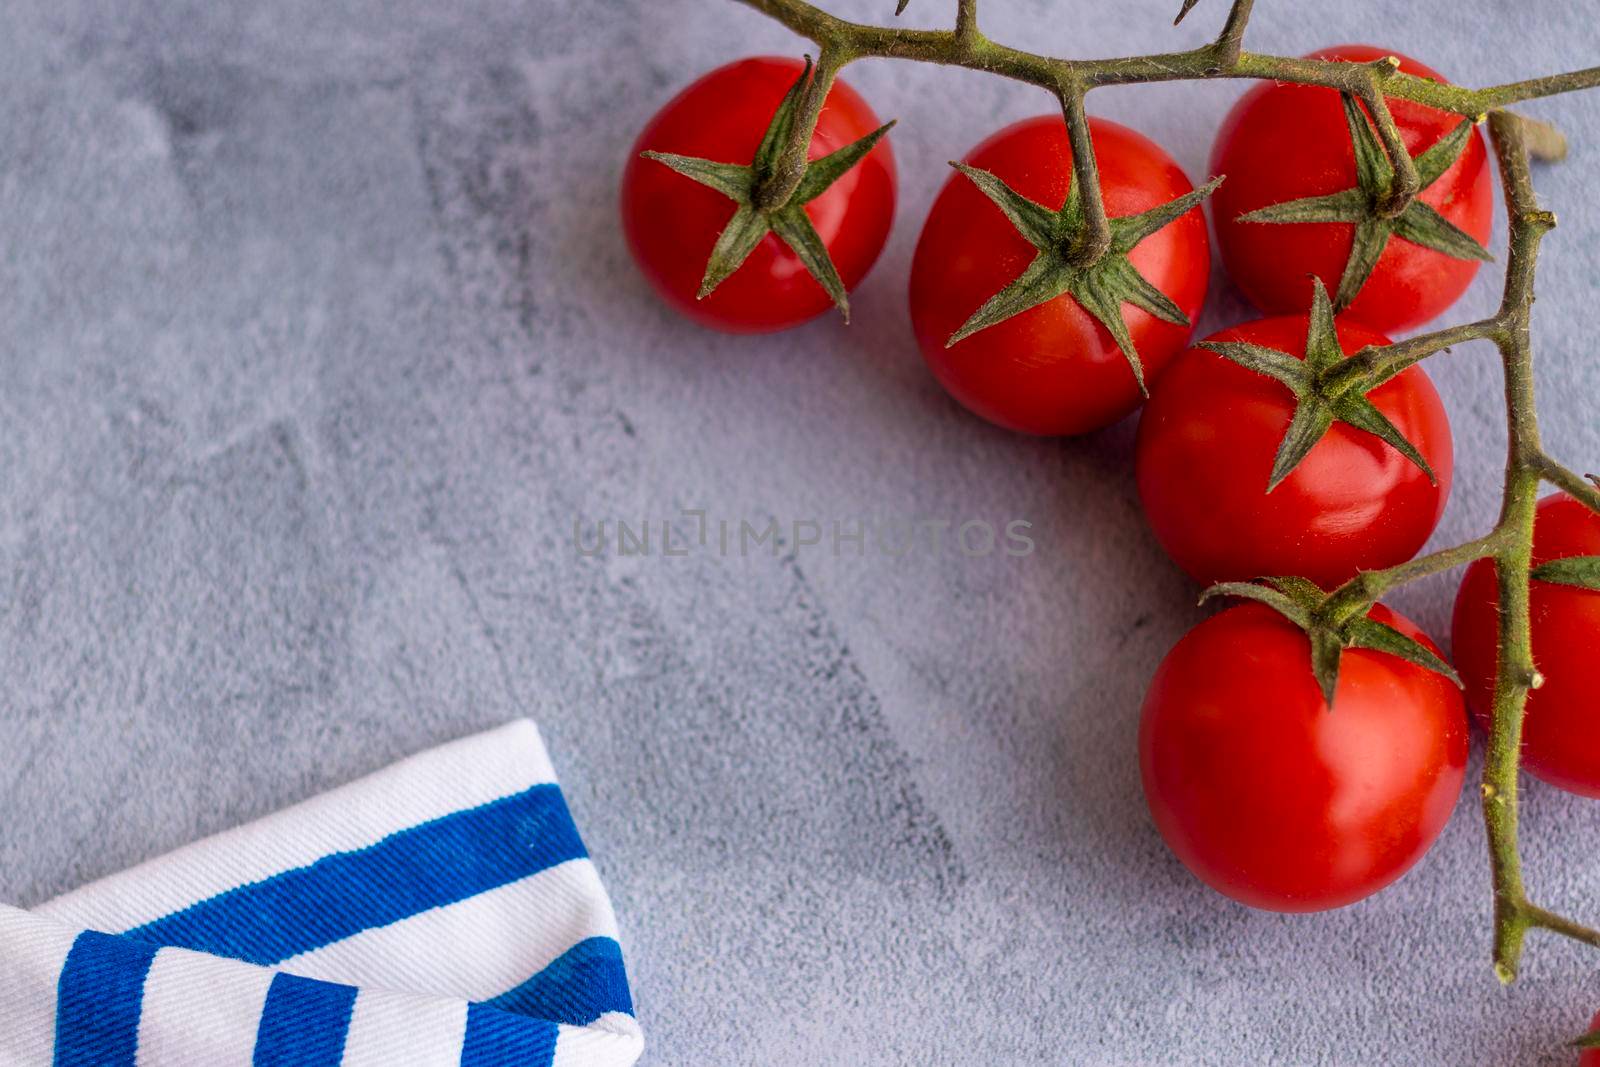 Cherry tomatoes on blue brushstroke background by eagg13